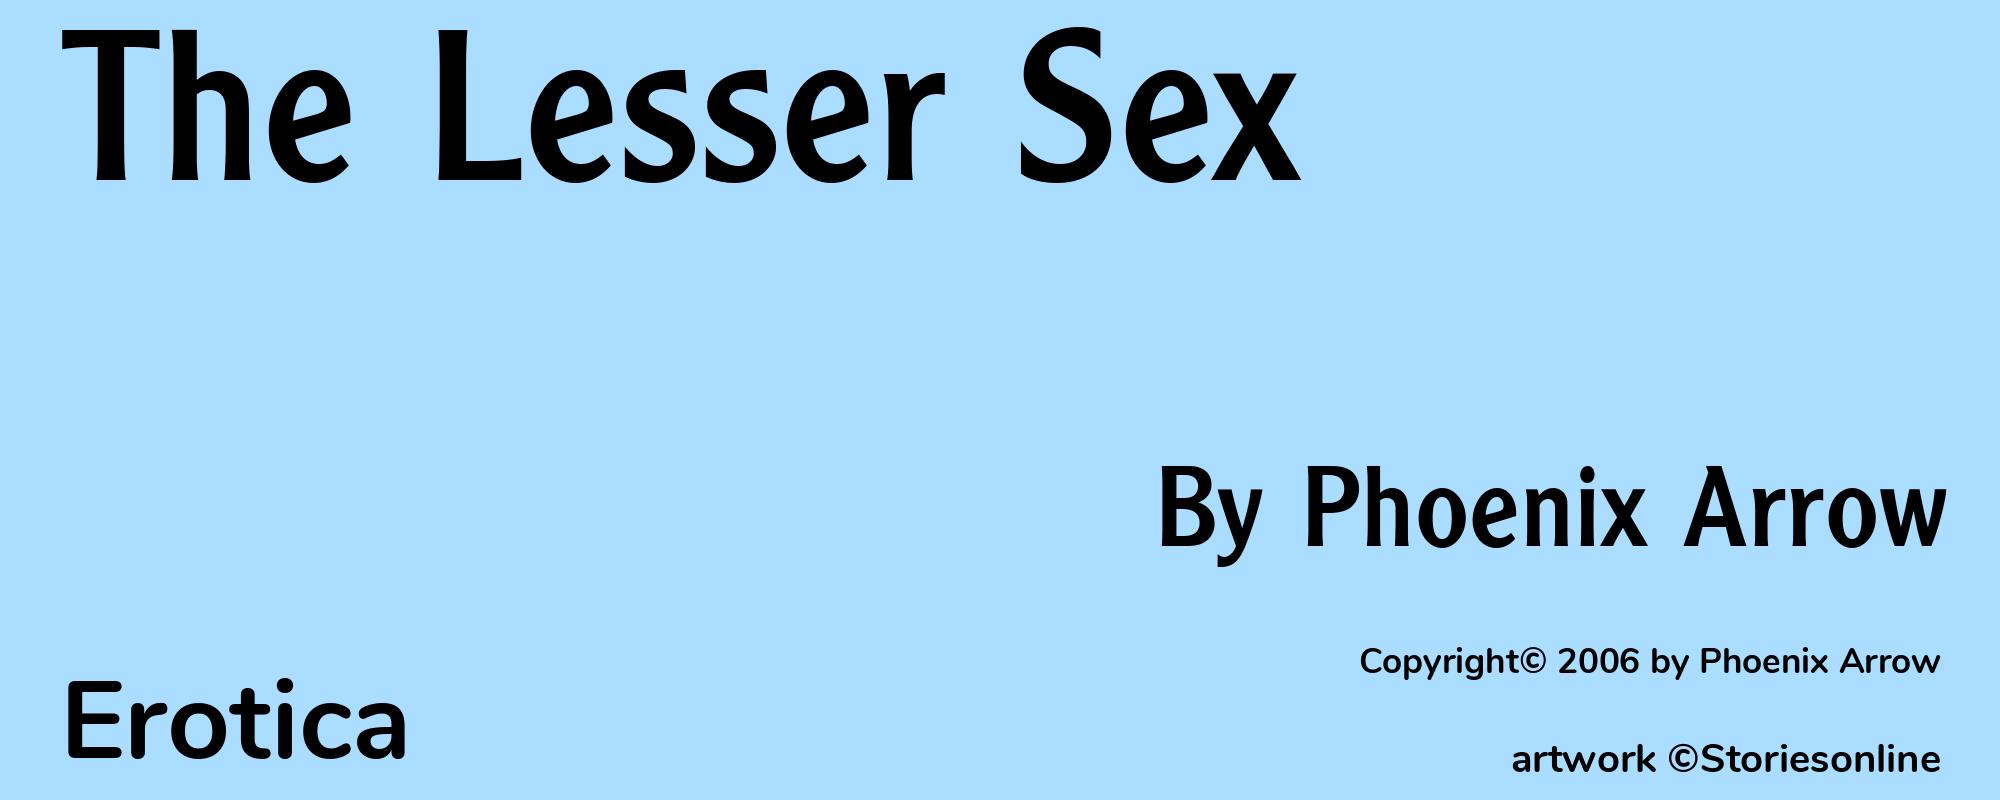 The Lesser Sex - Cover